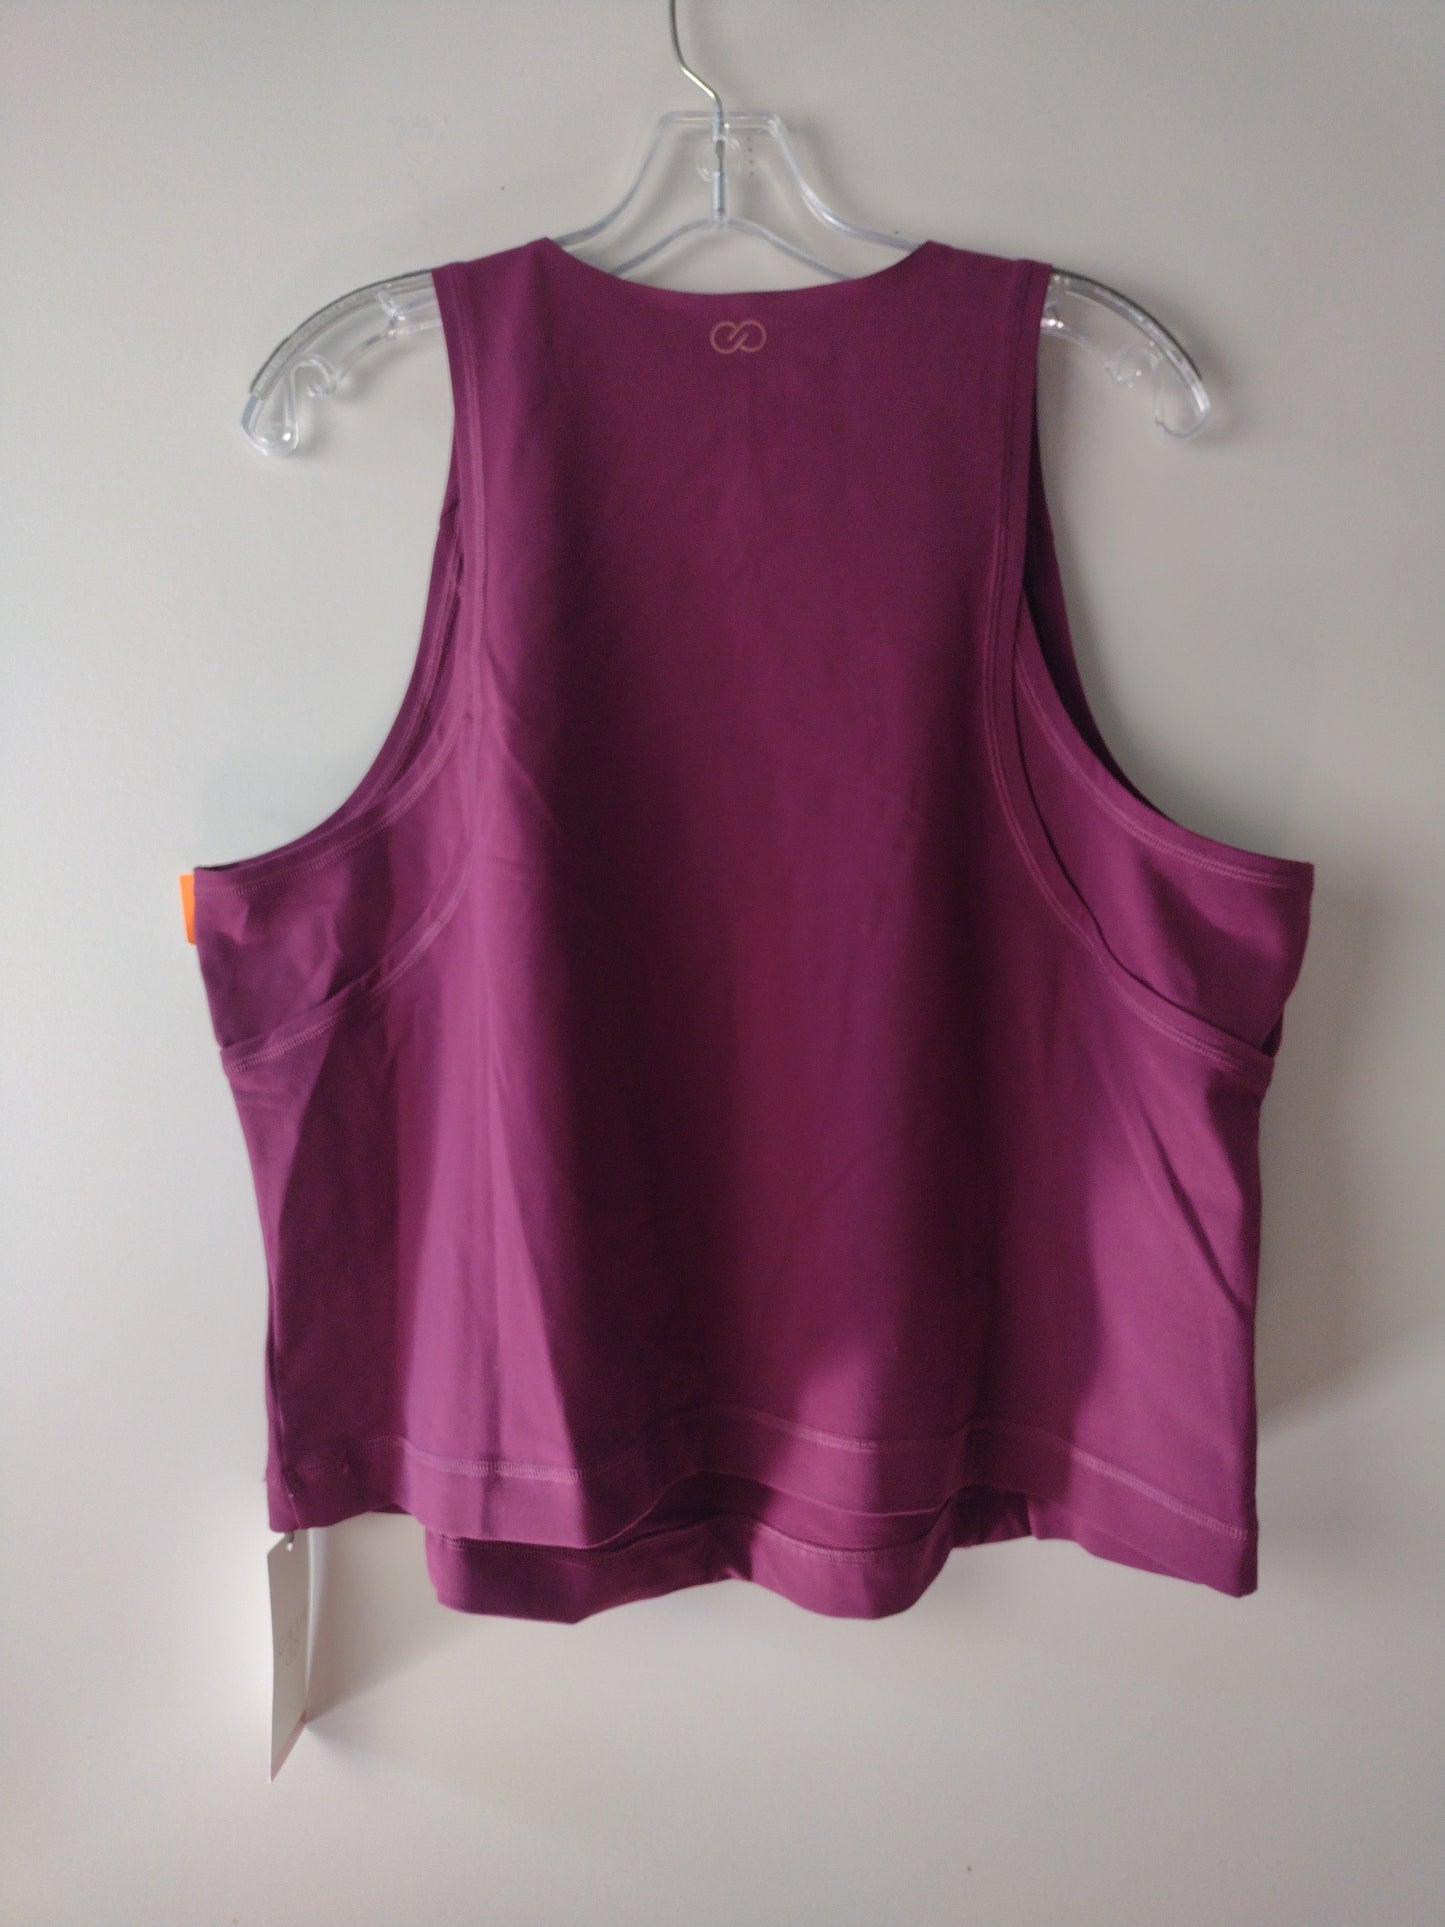 Athletic Tank Top By Calia  Size: 2x